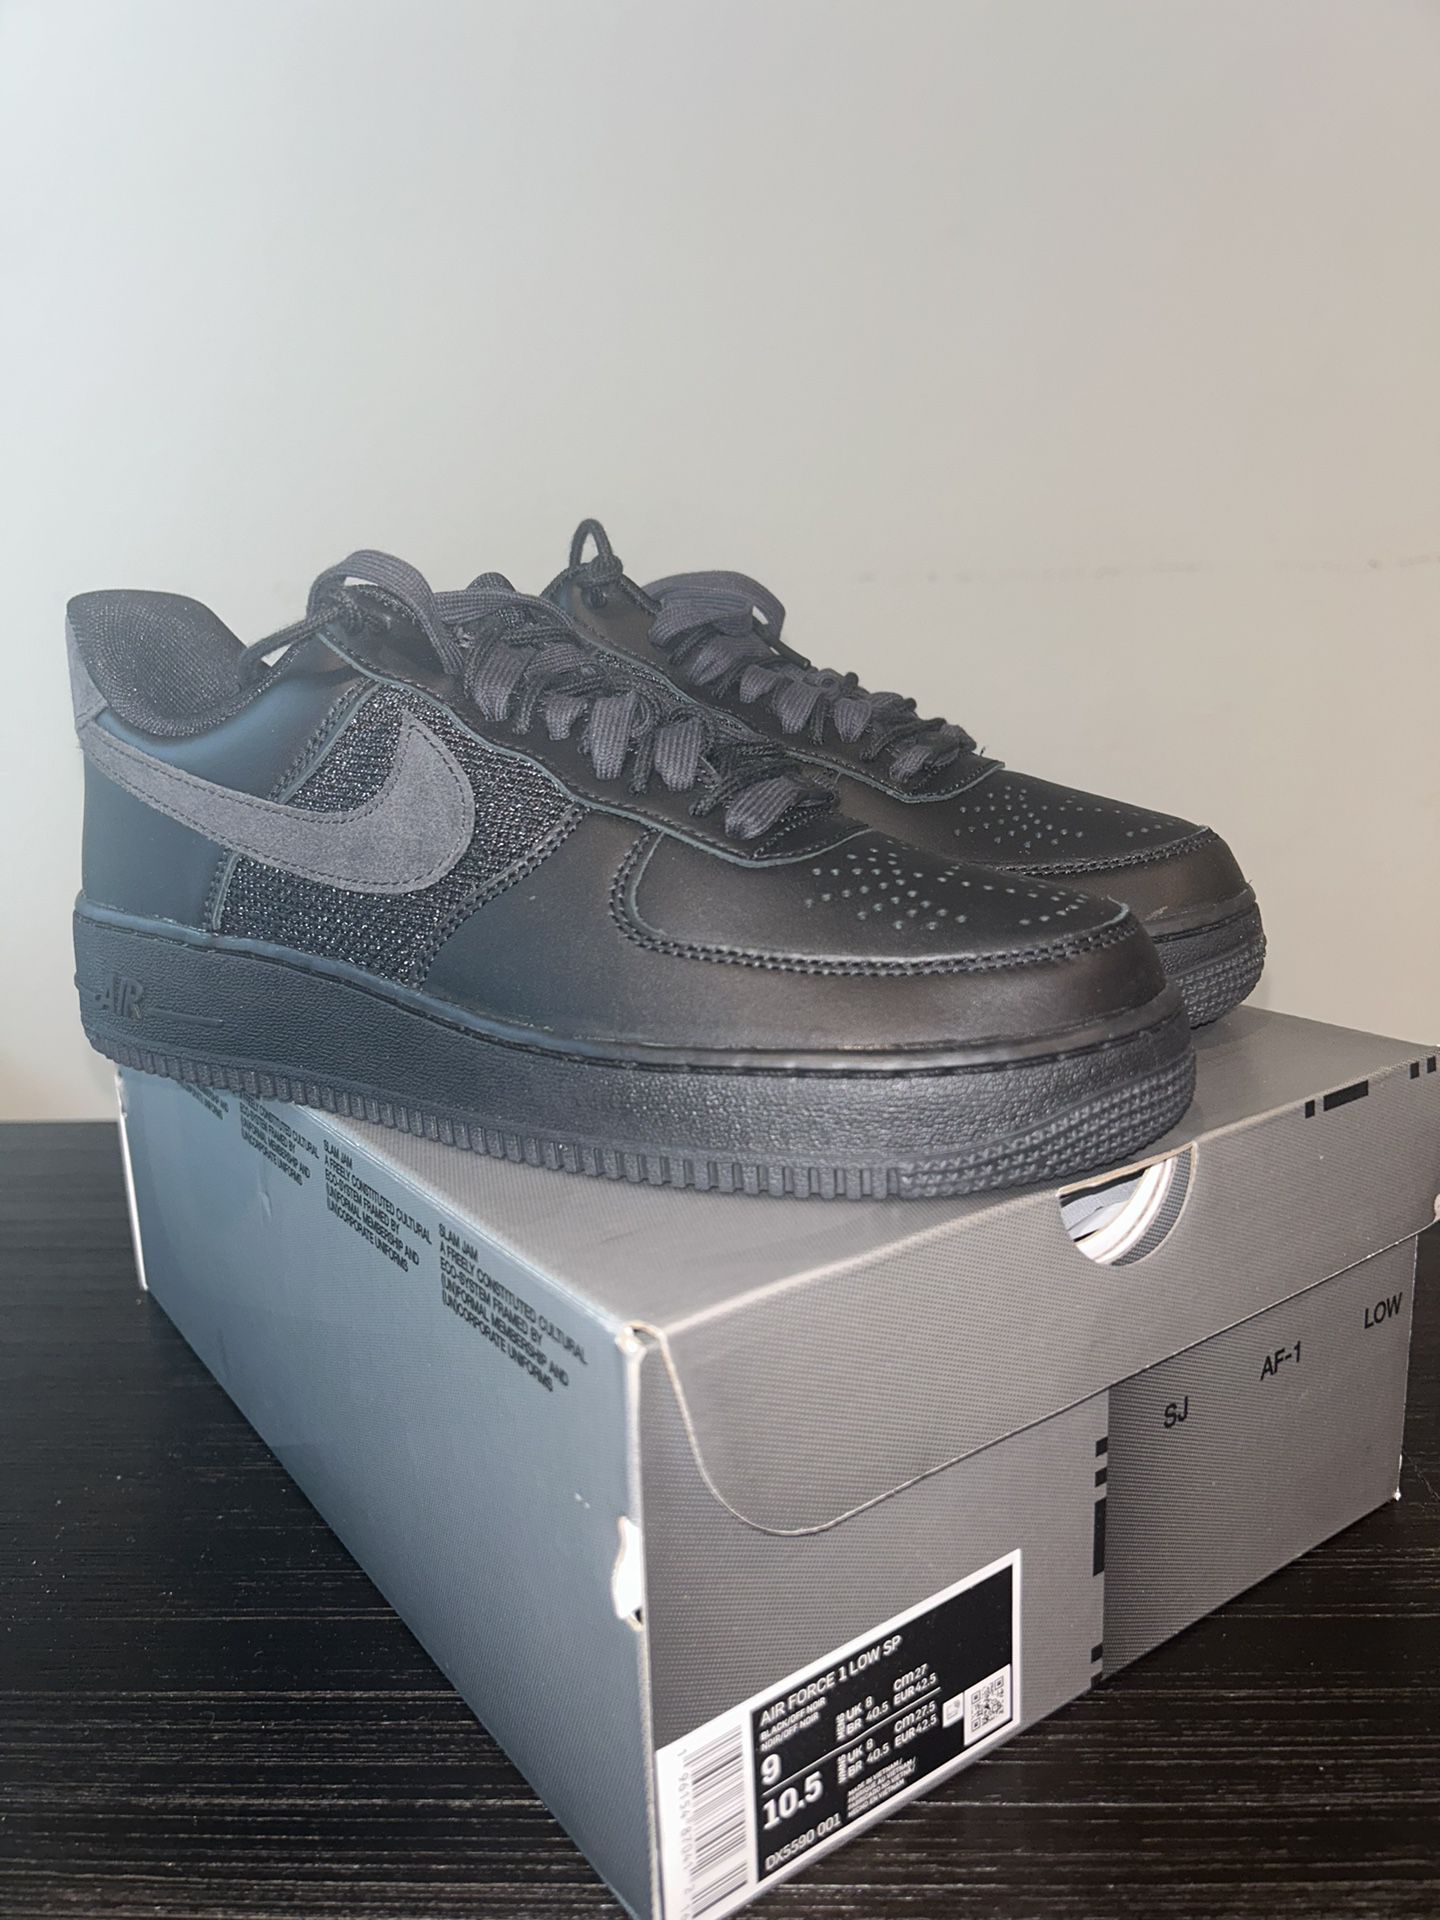 New Nike Air Force 1 Low SP Sizes 9, 10, 11.5